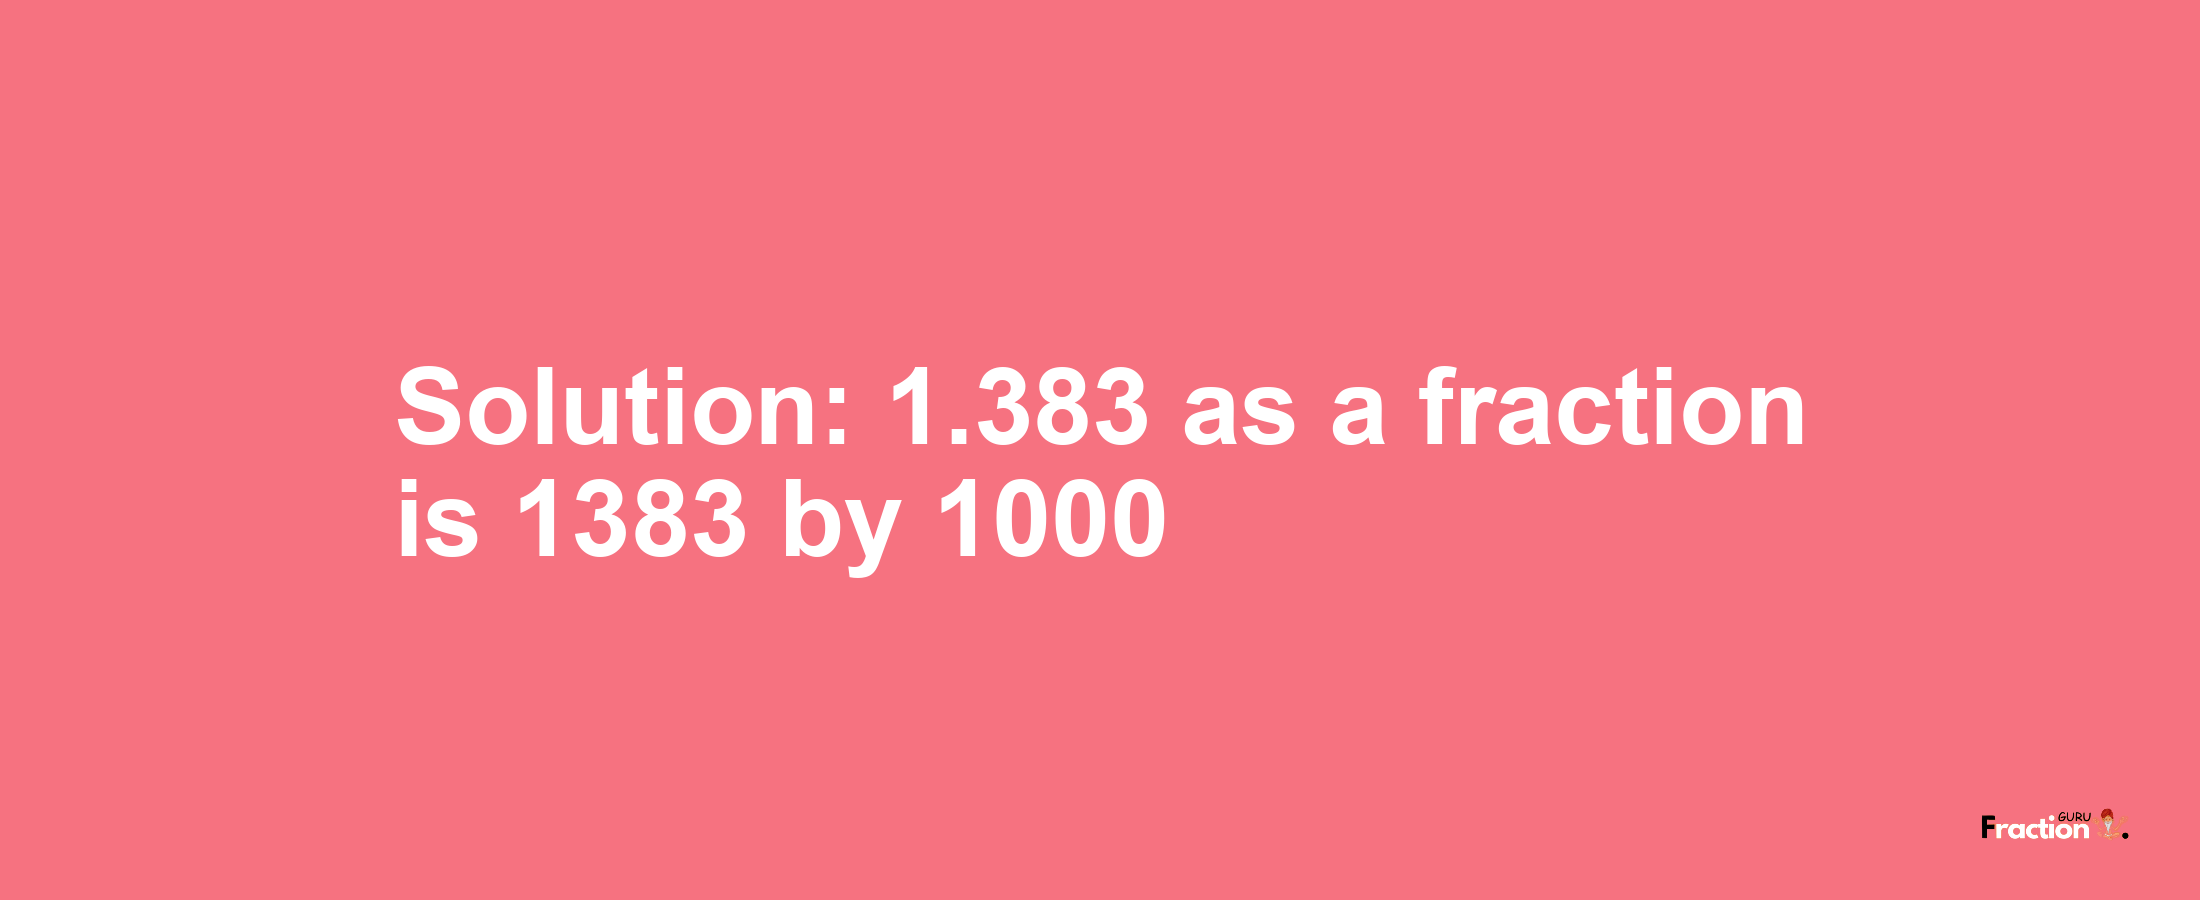 Solution:1.383 as a fraction is 1383/1000